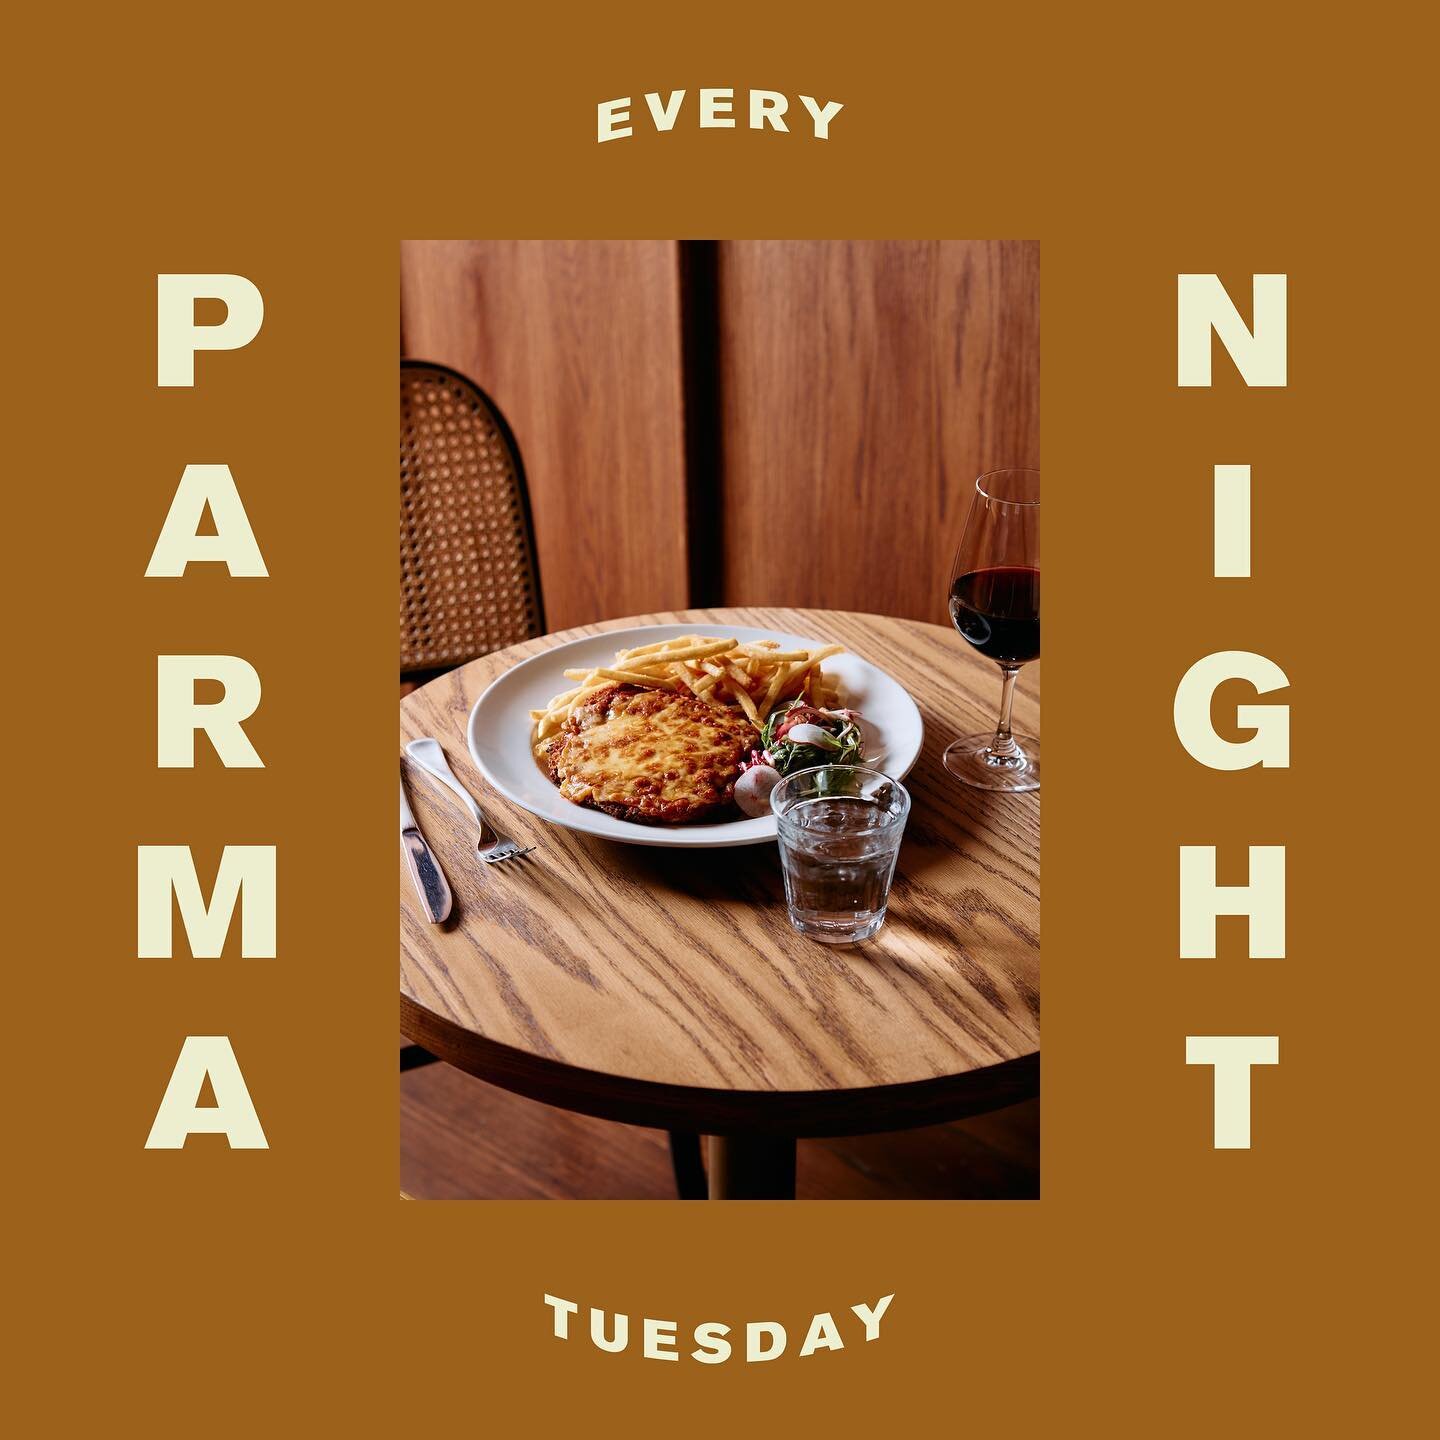 Cap off your day with Parma Tuesday 🍴🍻